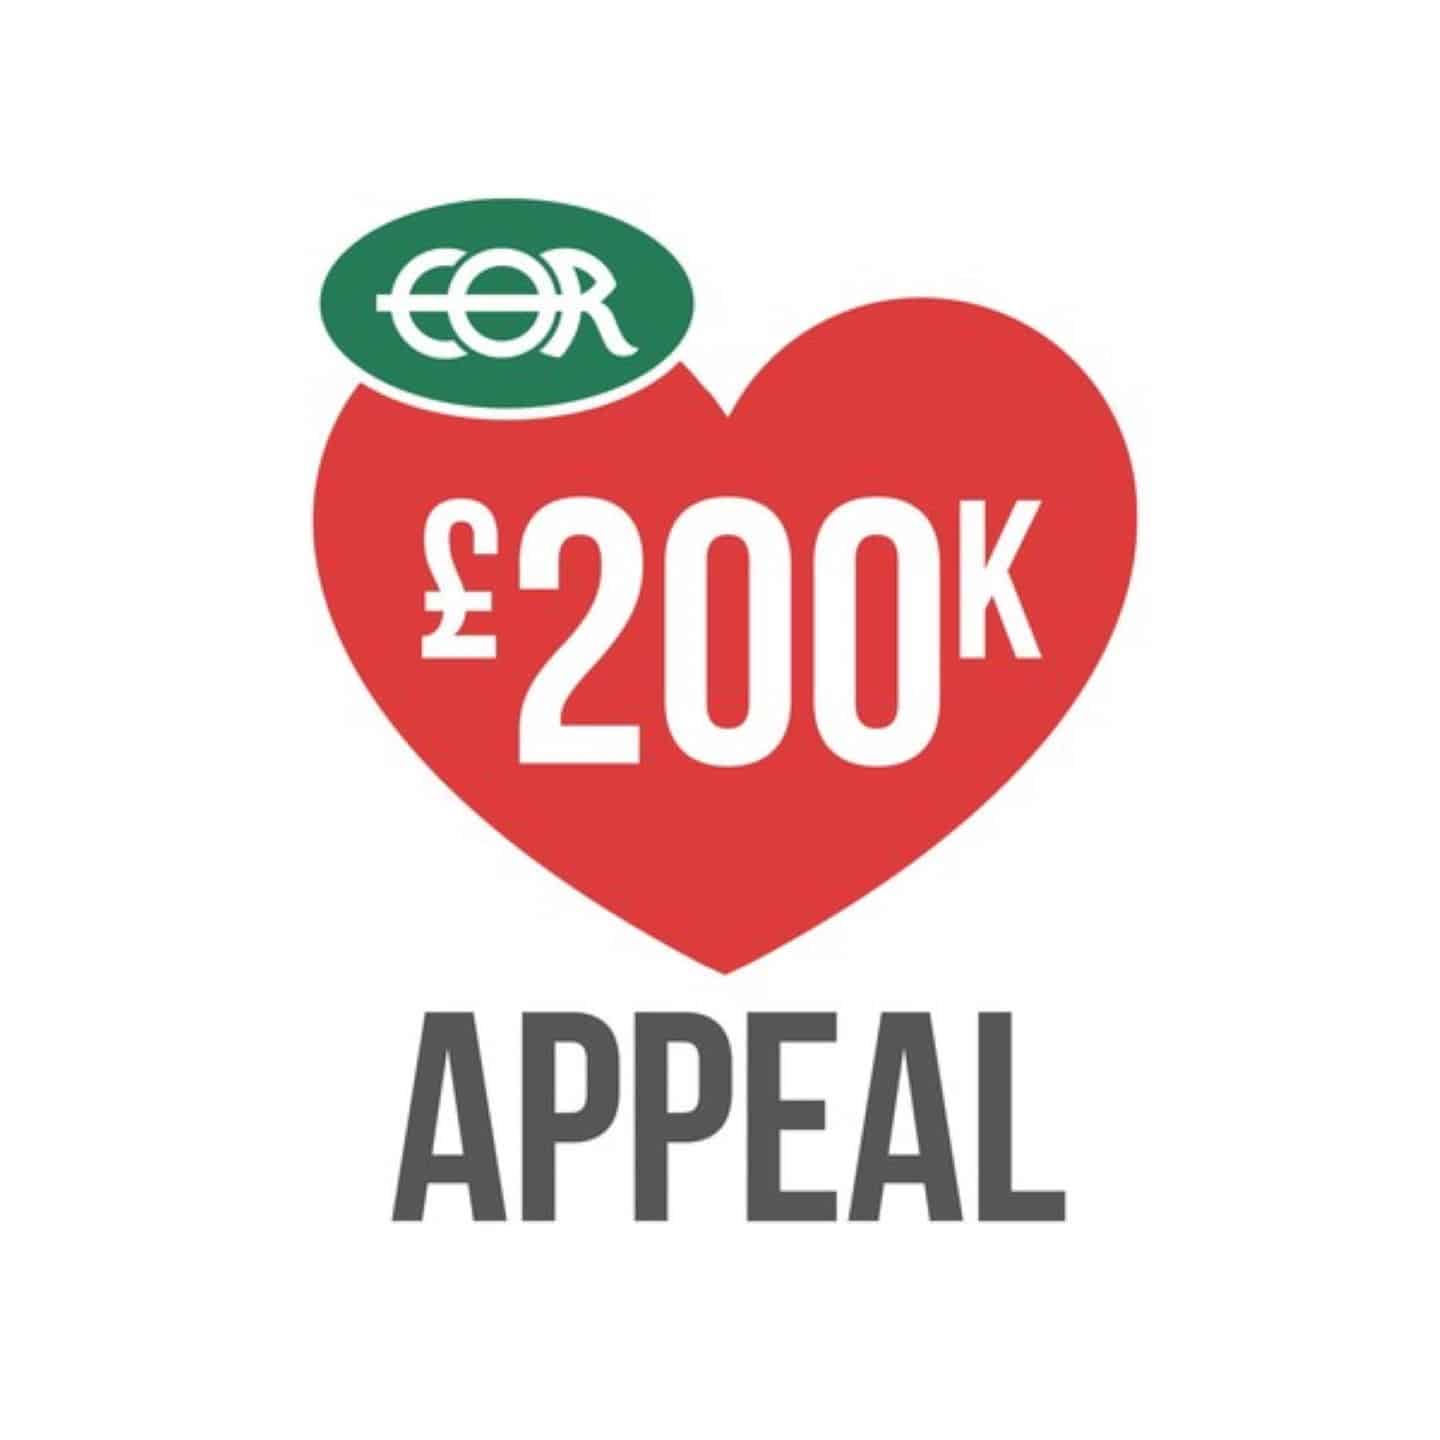 Epping Ongar Railway £200K Appeal // Credit EOR